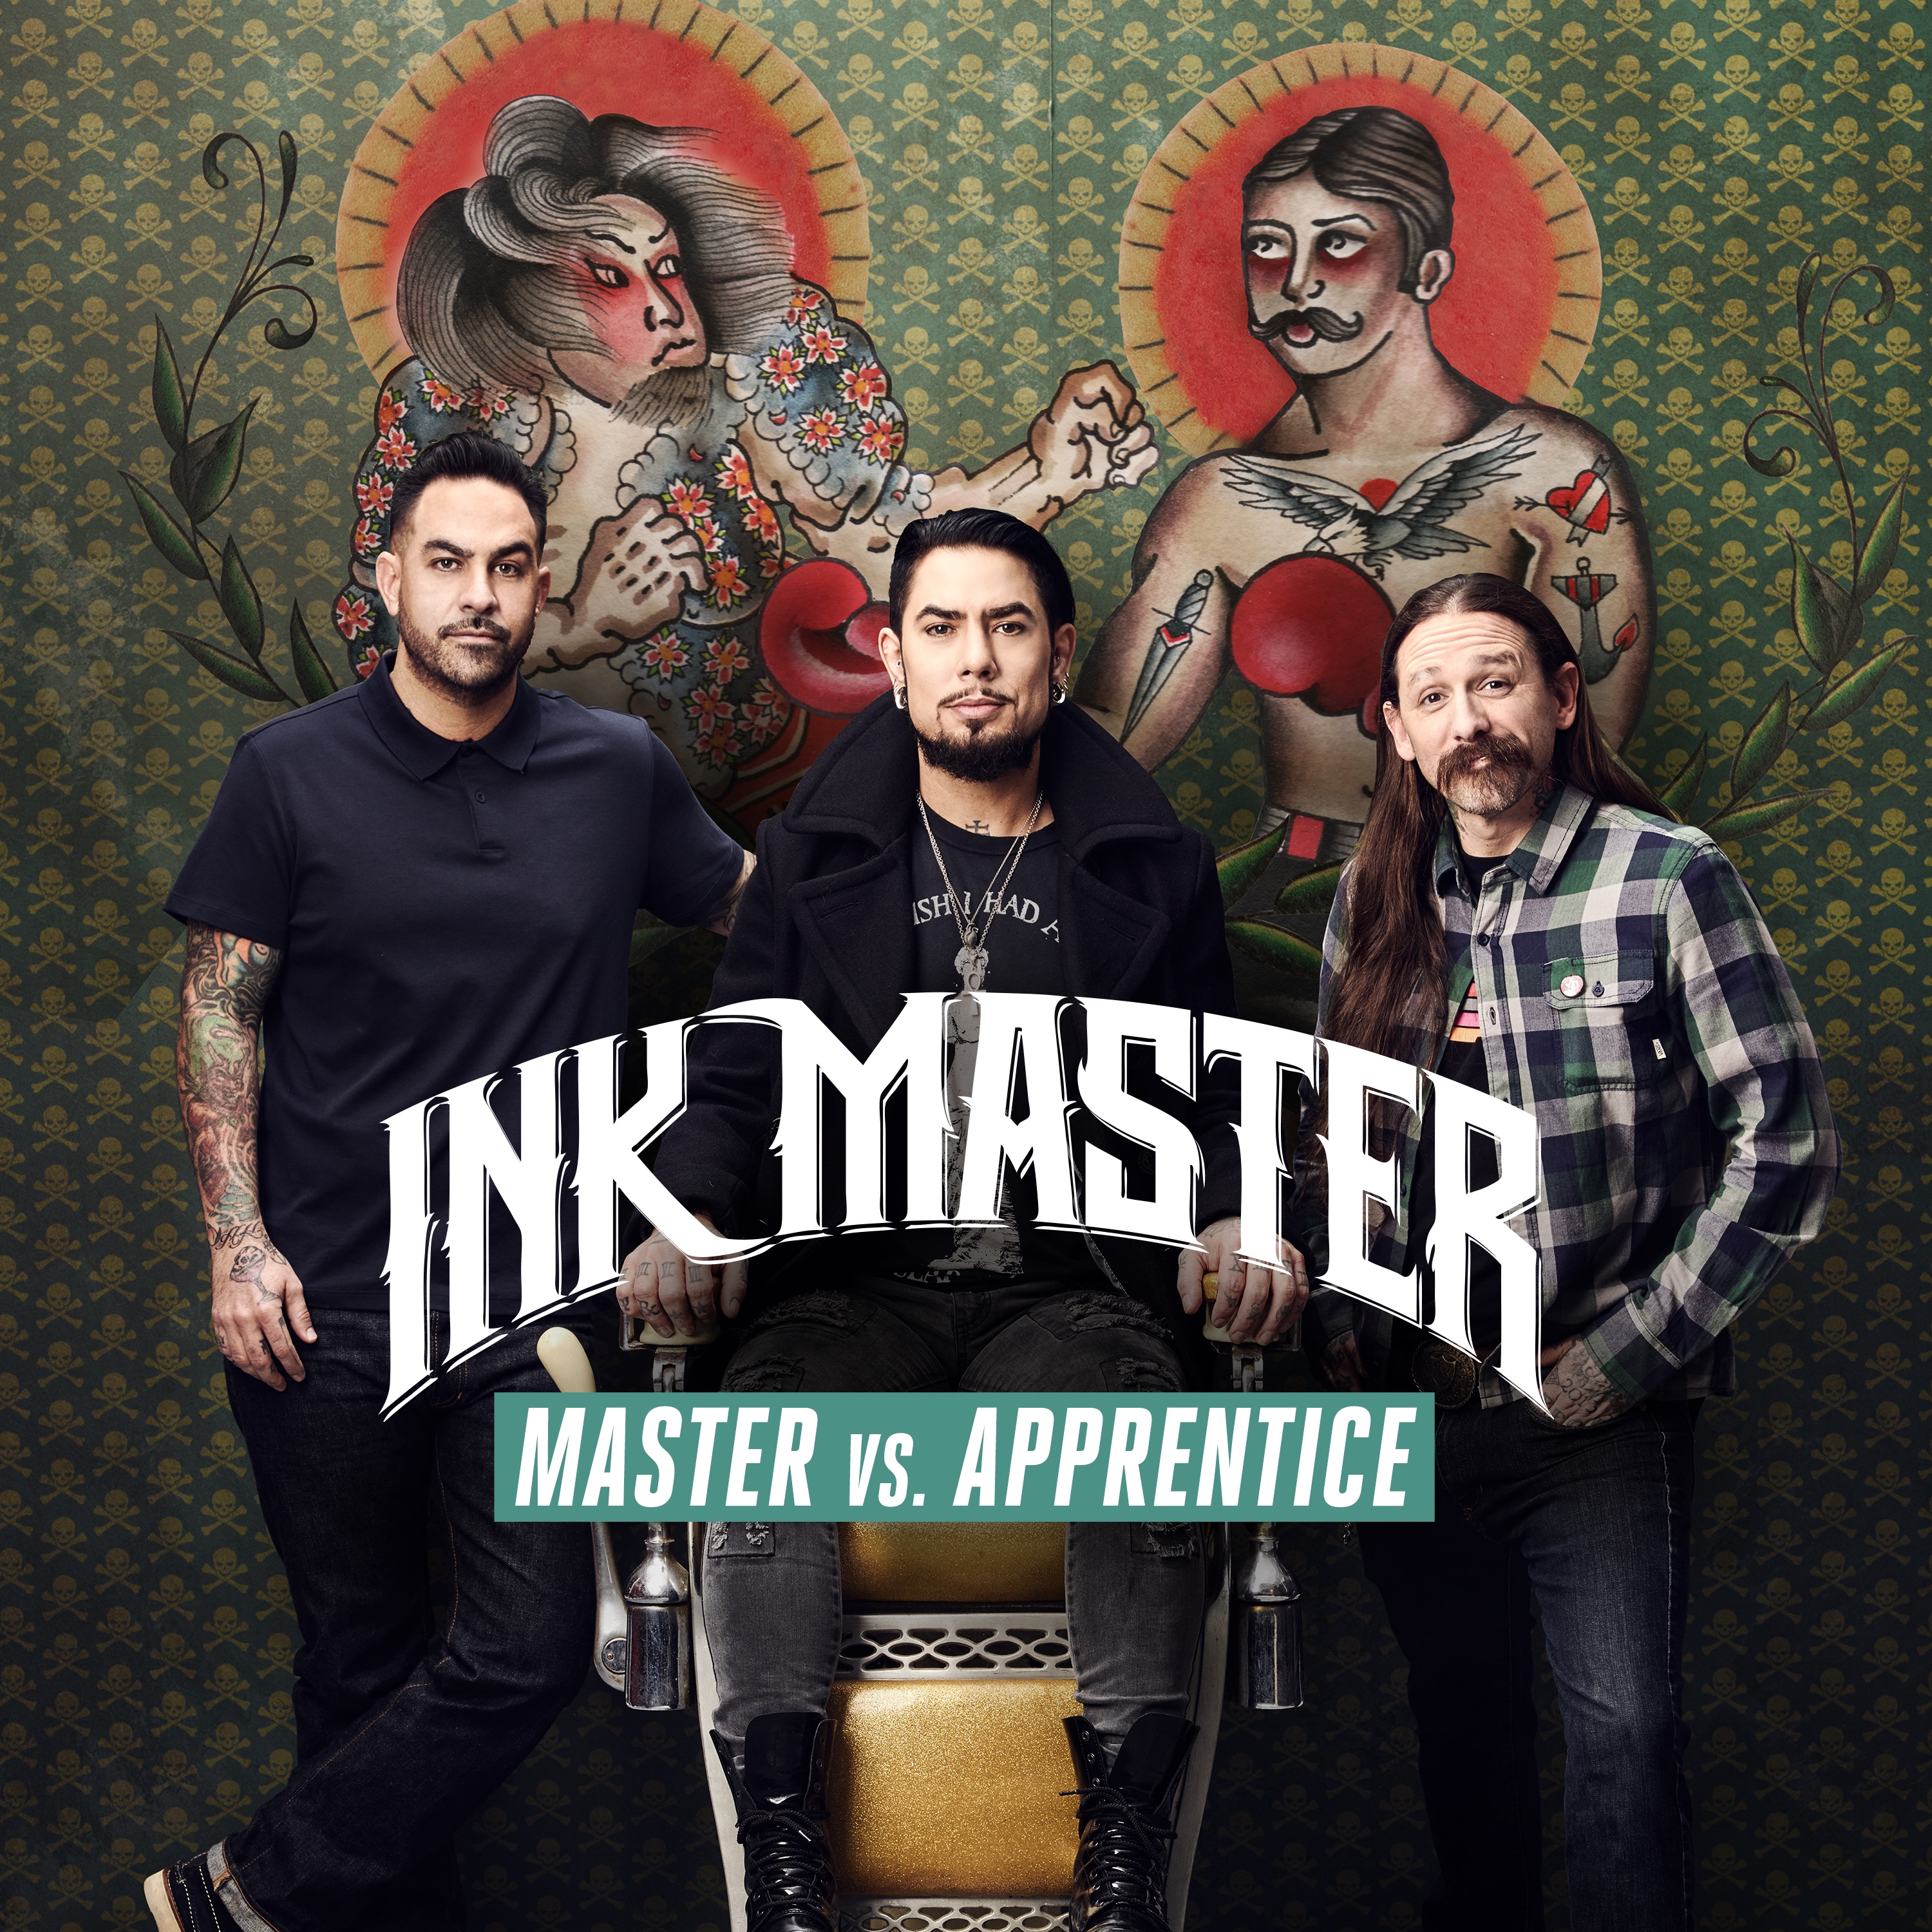 Ink Master. Master and Apprentice. Master band